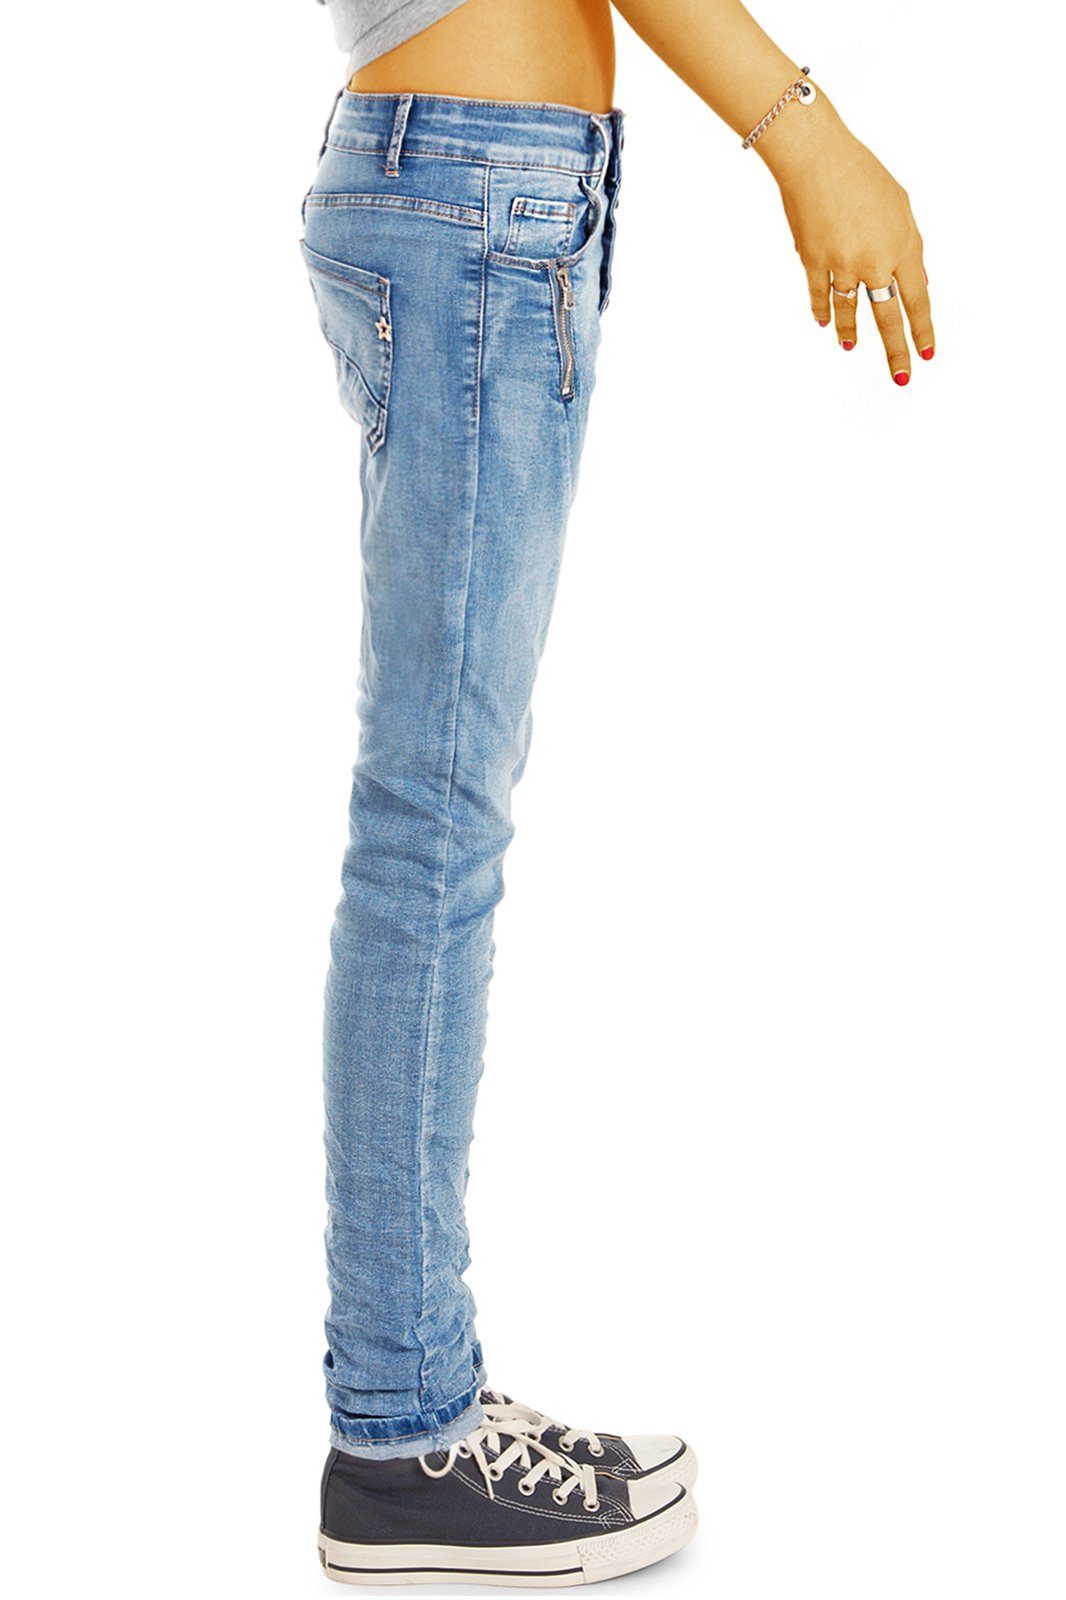 tapered j6i Knopfleiste Hosen be blau Relax-fit-Jeans styled mit baggy Damenjeans,